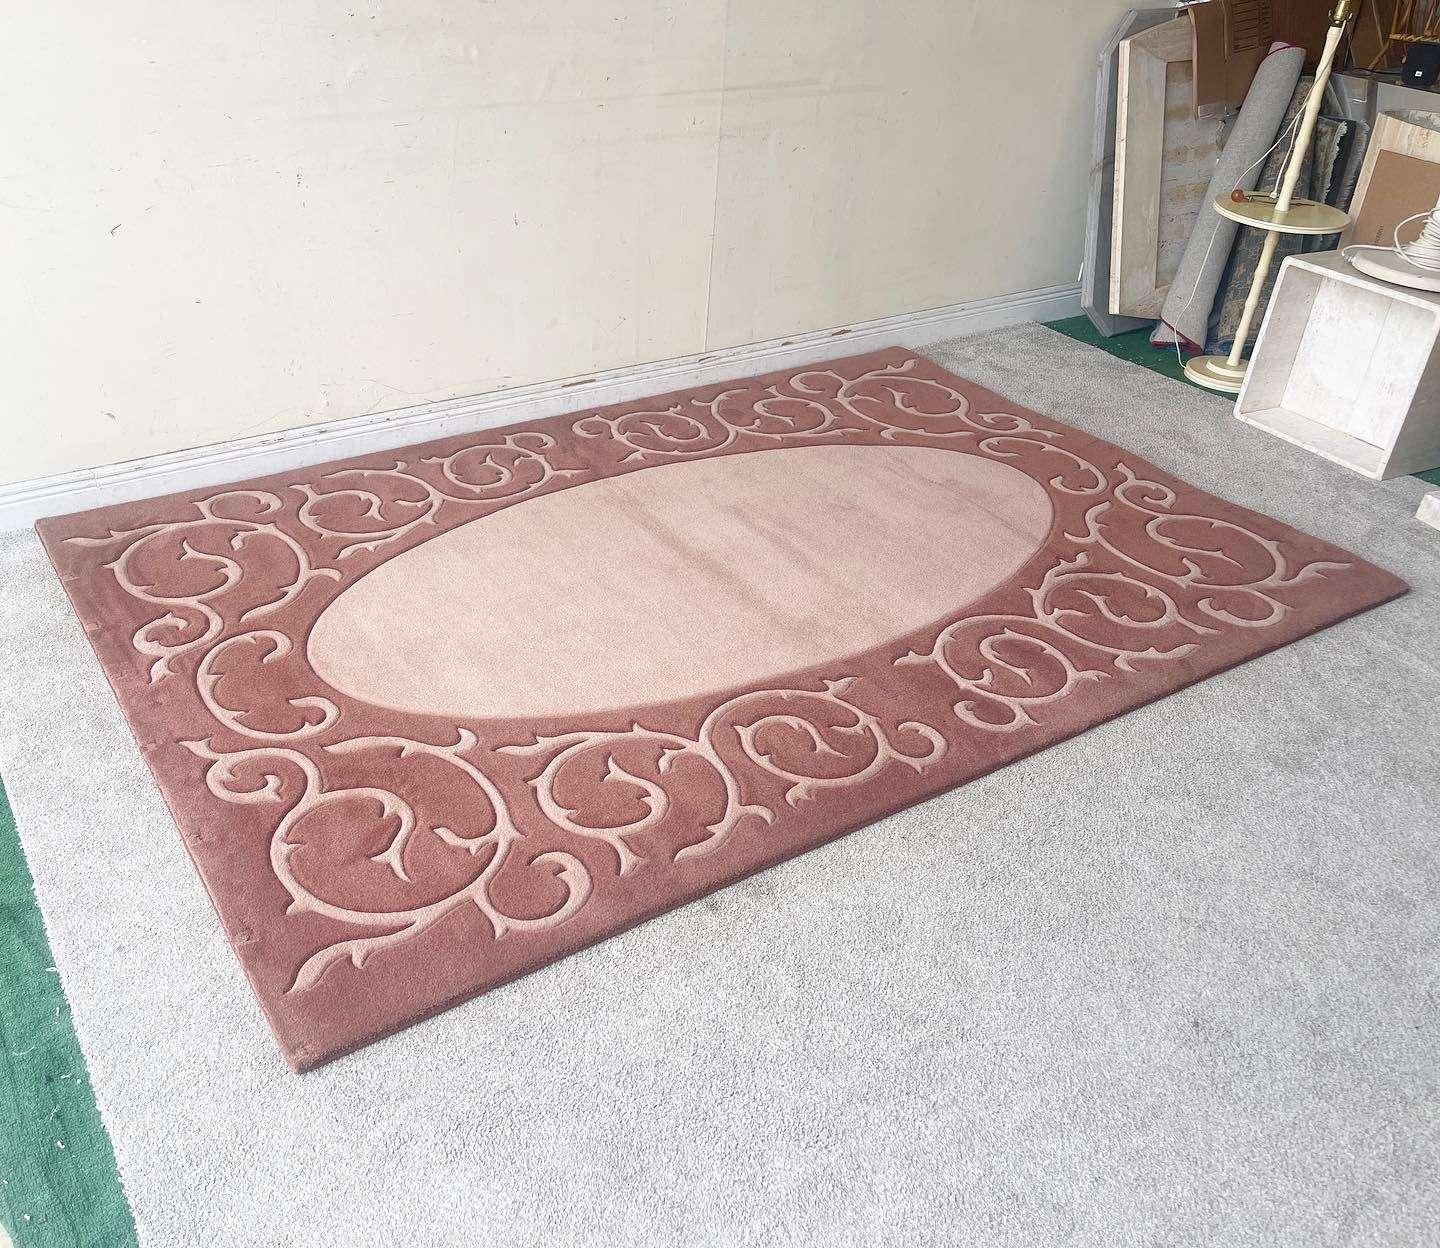 Exceptional vintage postmodern rectangular area rug. Features a light pink oval interior bordered by a dark pink section with light pink vining throughout.

Rug 21
